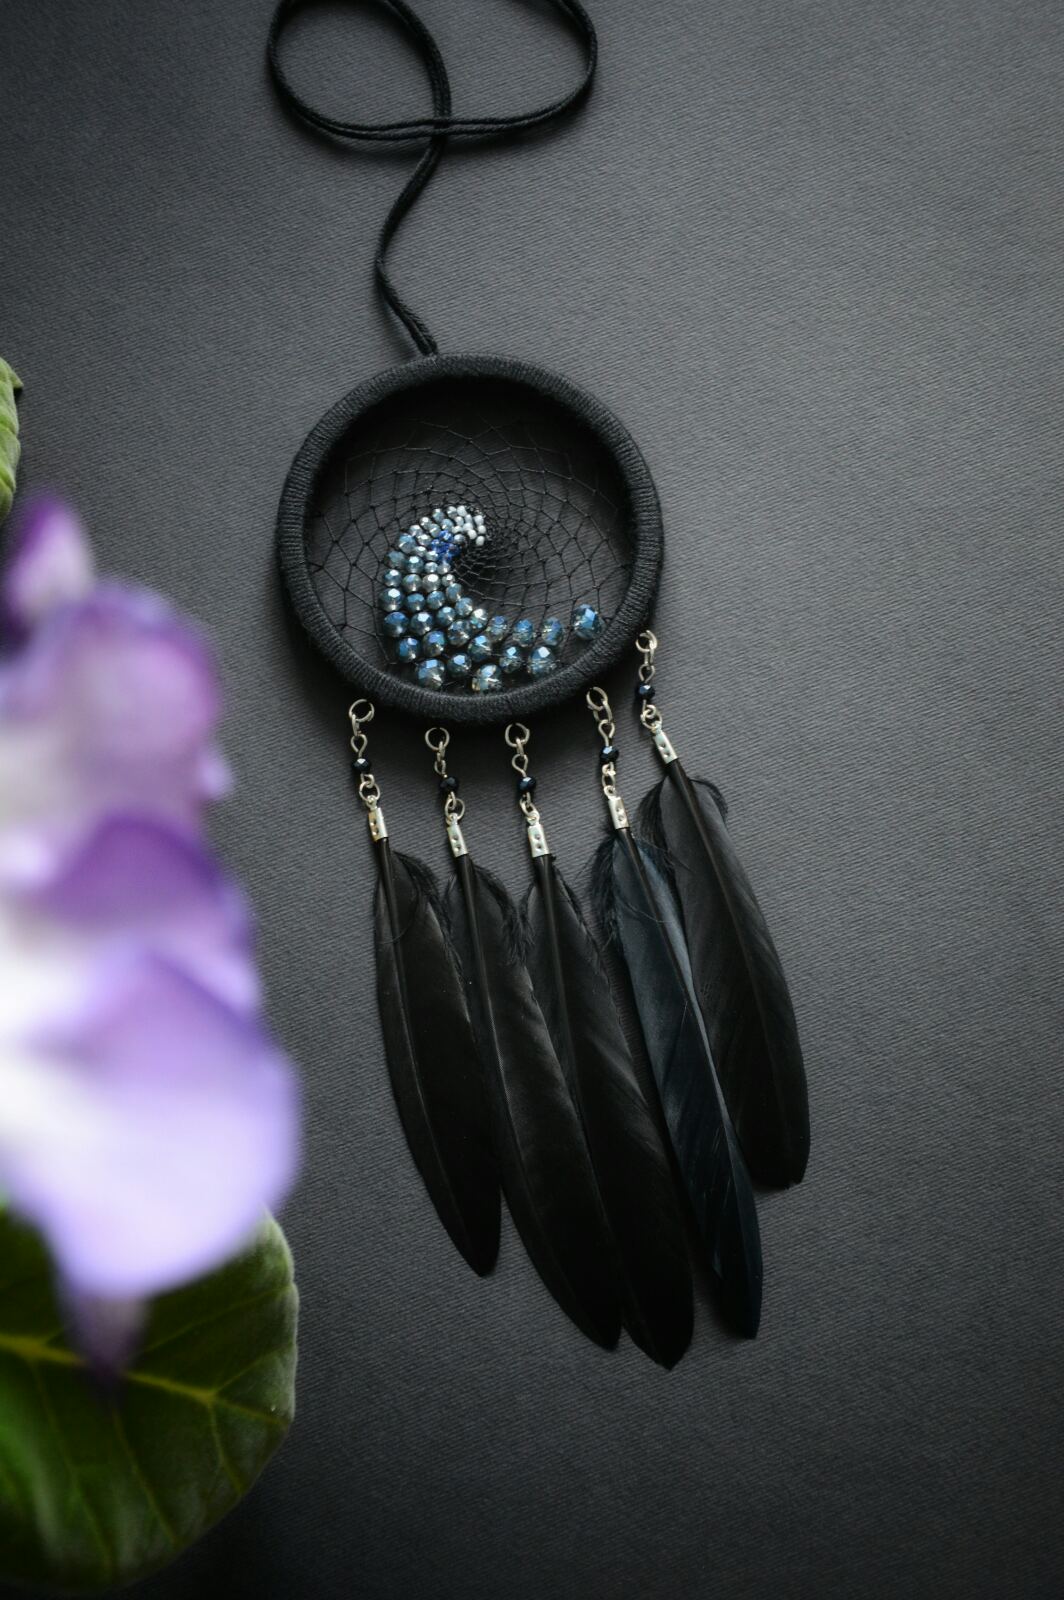 Small black dream catcher with blue wave ornament